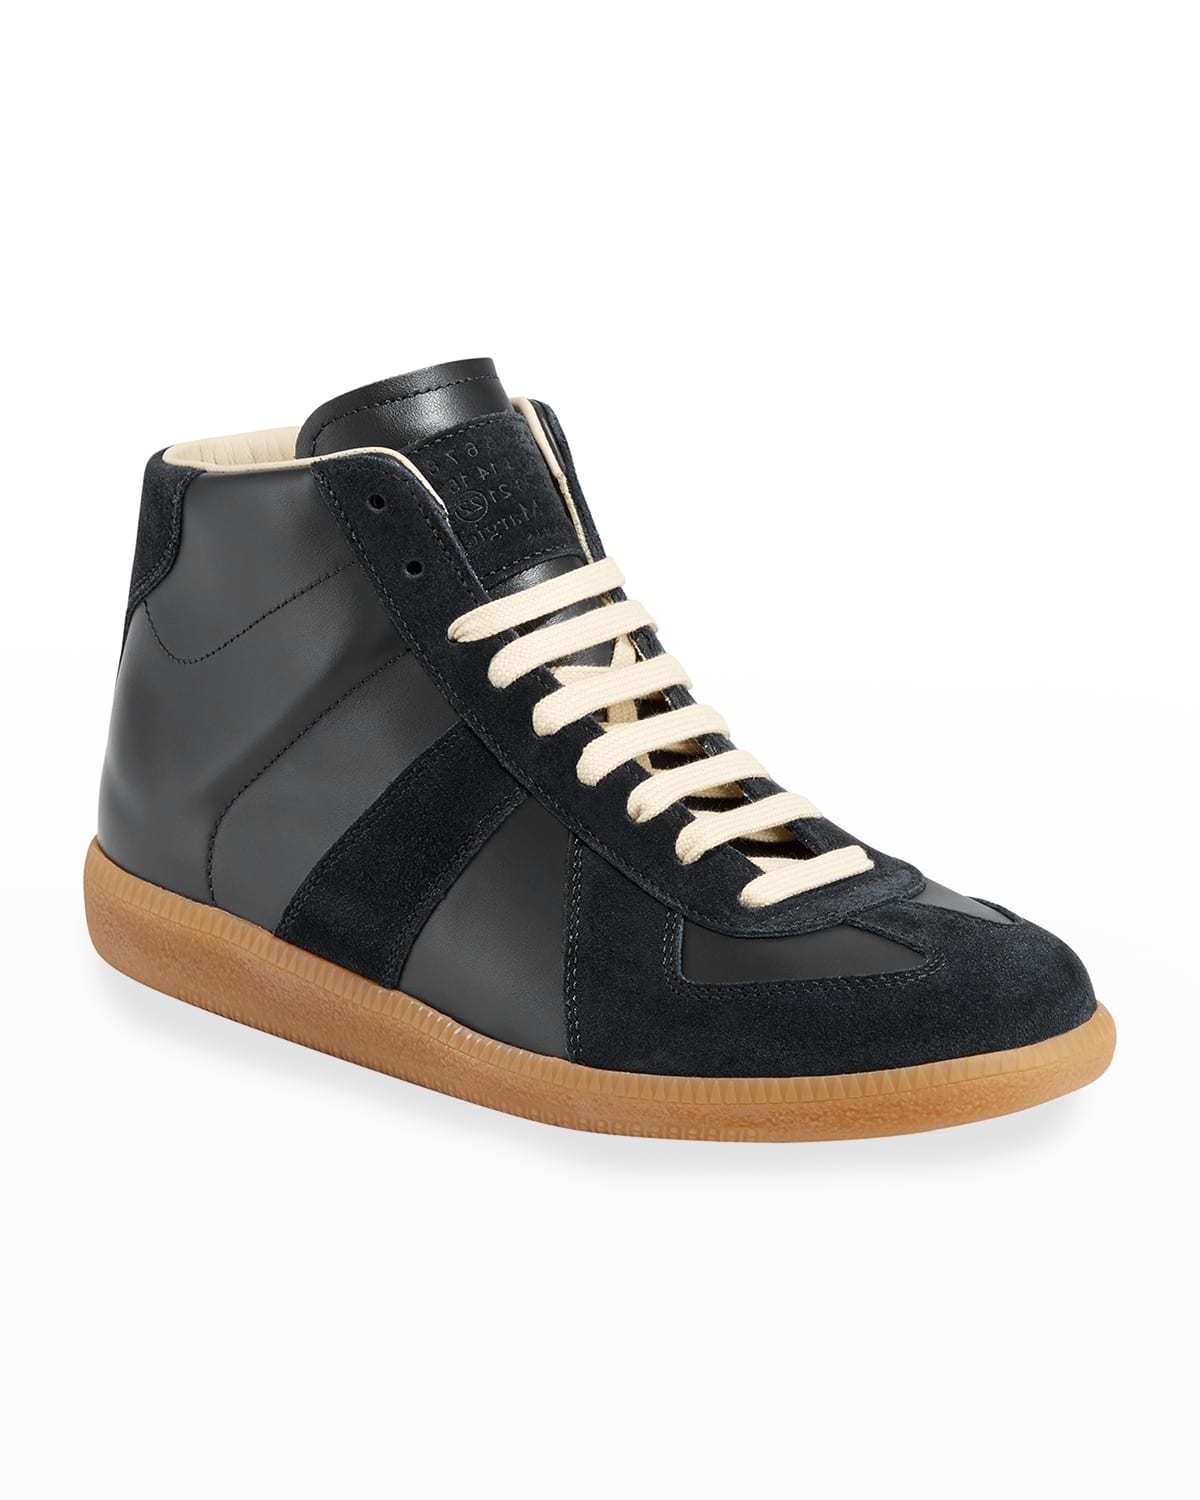 MAISON MARGIELA MEN'S REPLICA PANELED LEATHER/SUEDE HIGH-TOP SNEAKERS,PROD239490137